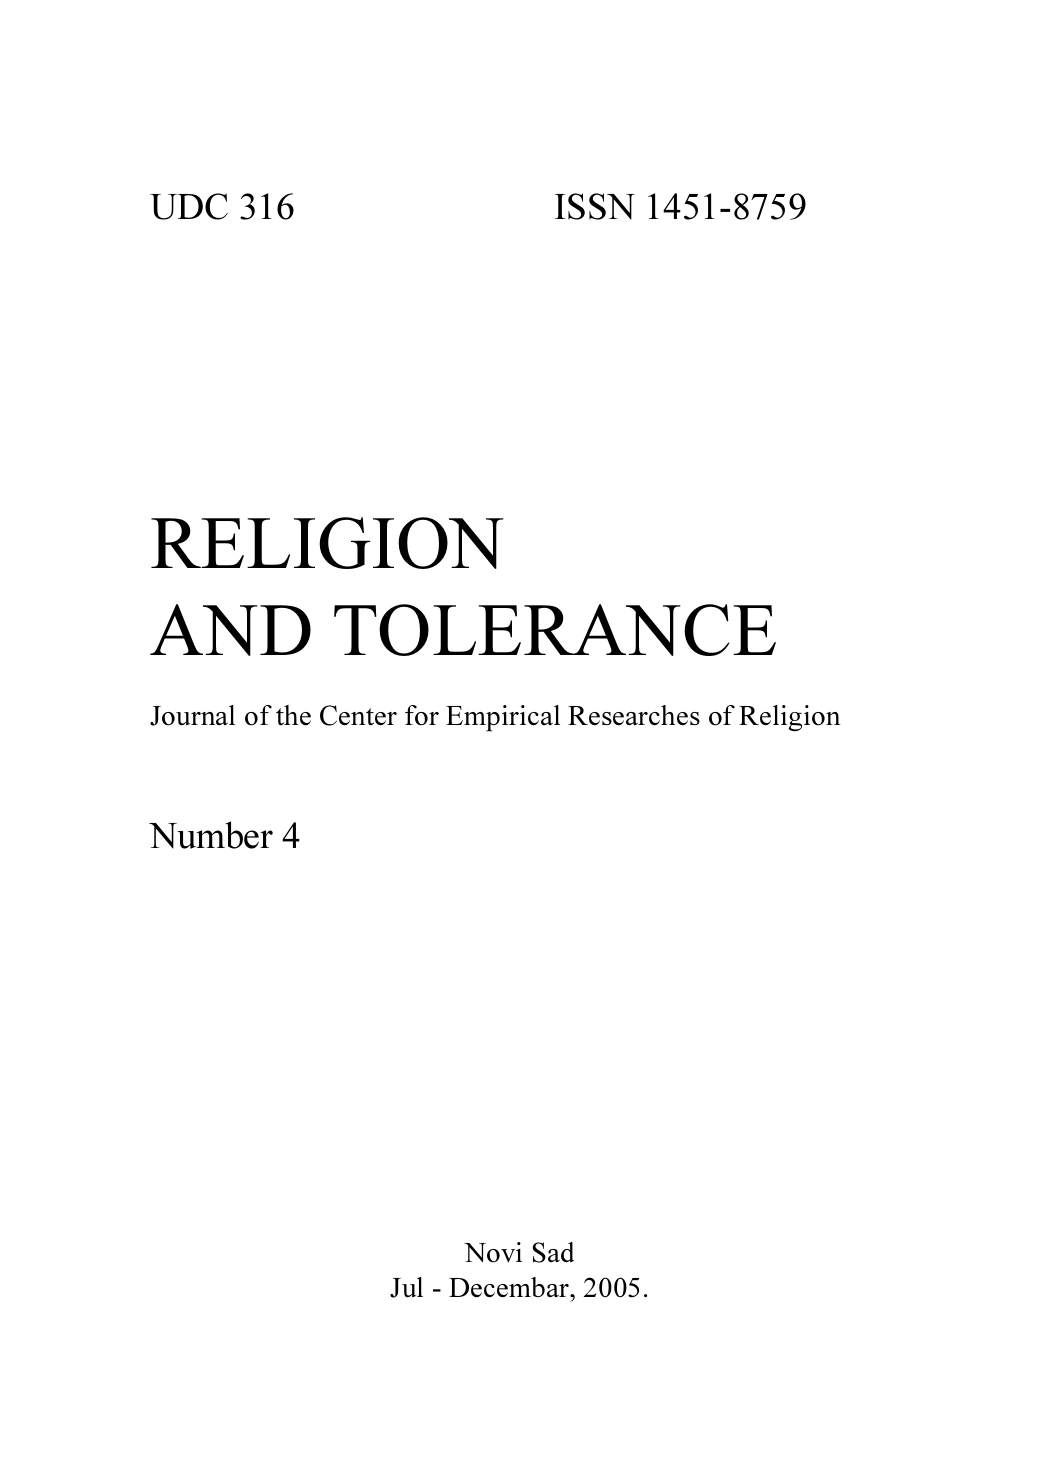 PROMOTION OF RELIGION AND TOLERANCE Cover Image